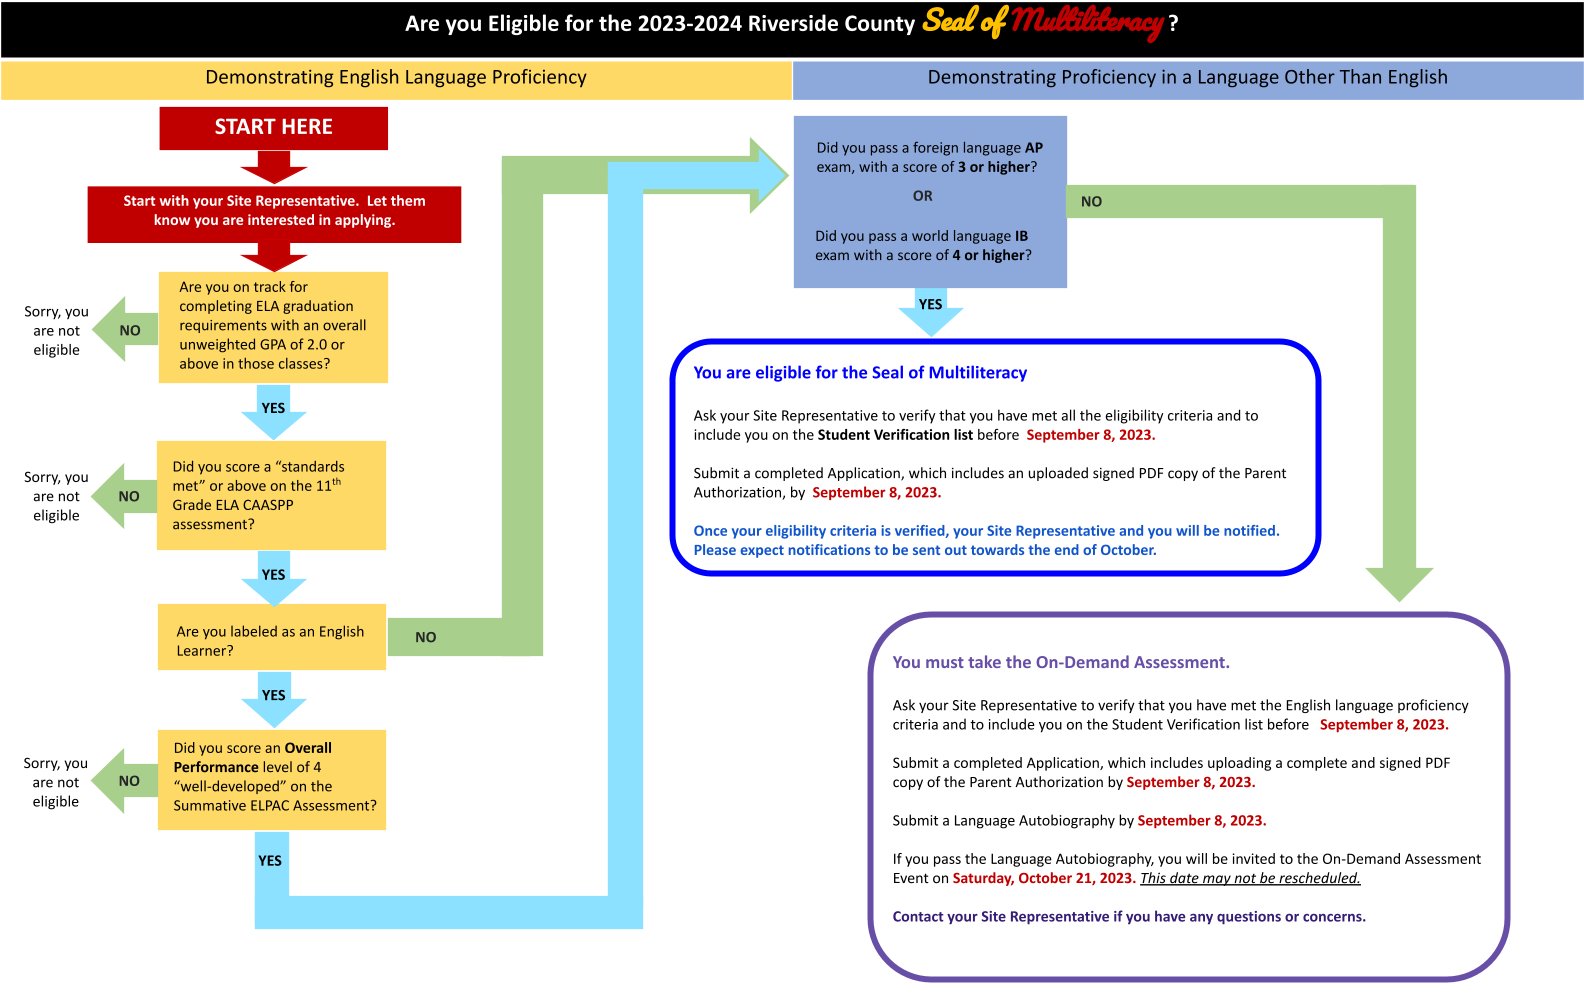 2022-23 Are you Eligibile flowchart